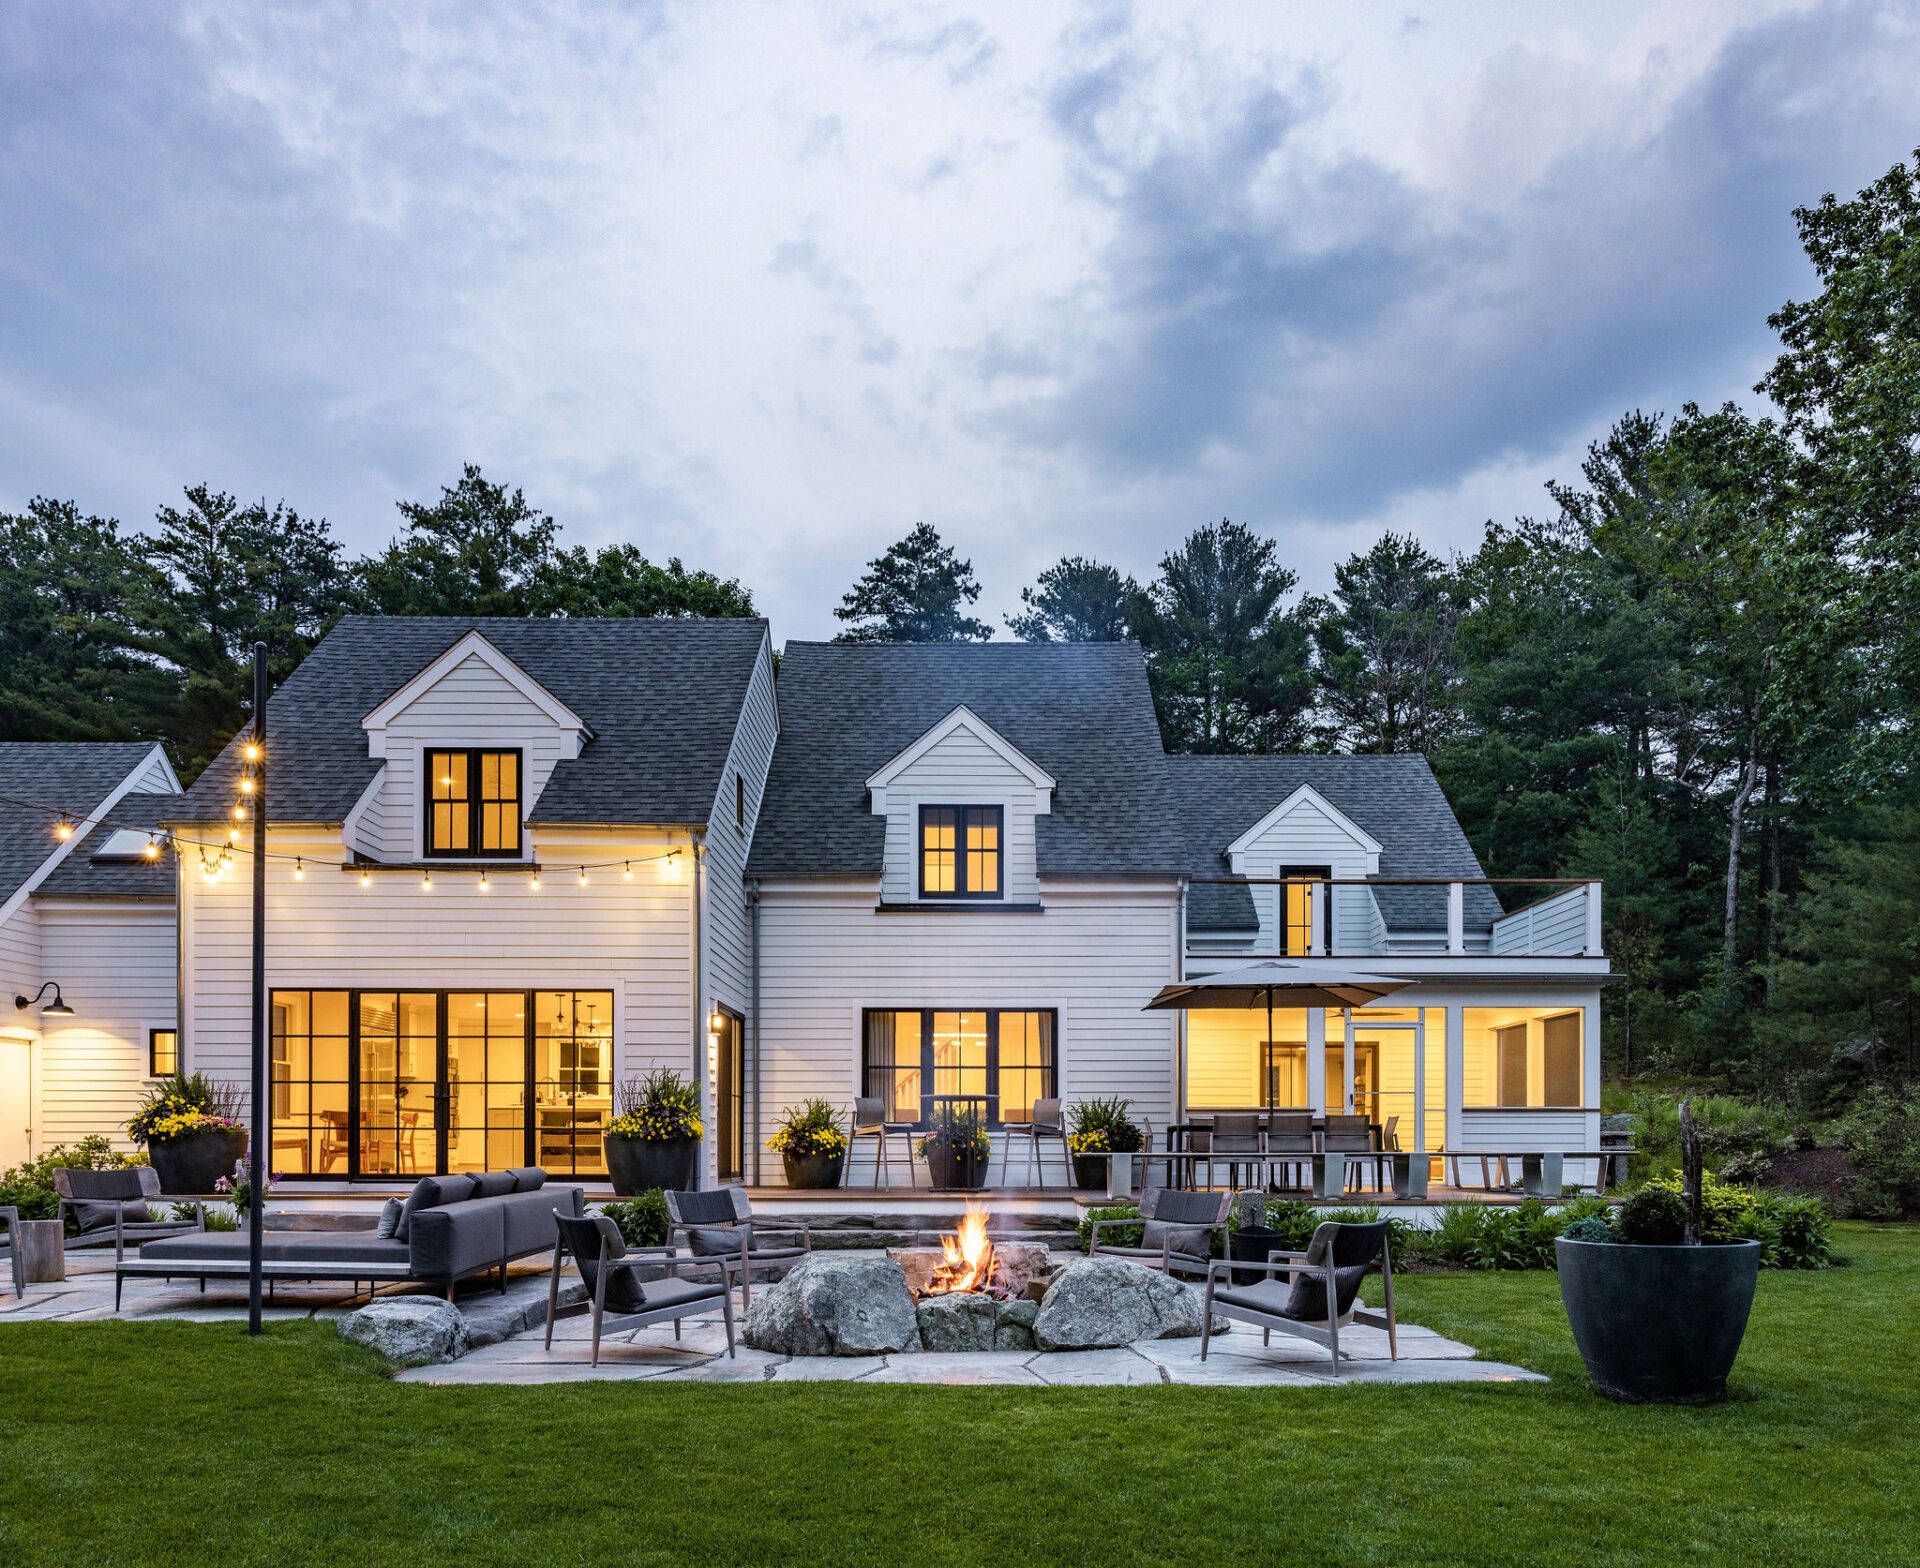 The image shows a modern two-story house with white siding, illuminated by interior lighting and exterior string lights, featuring a backyard with a fire pit and seating.